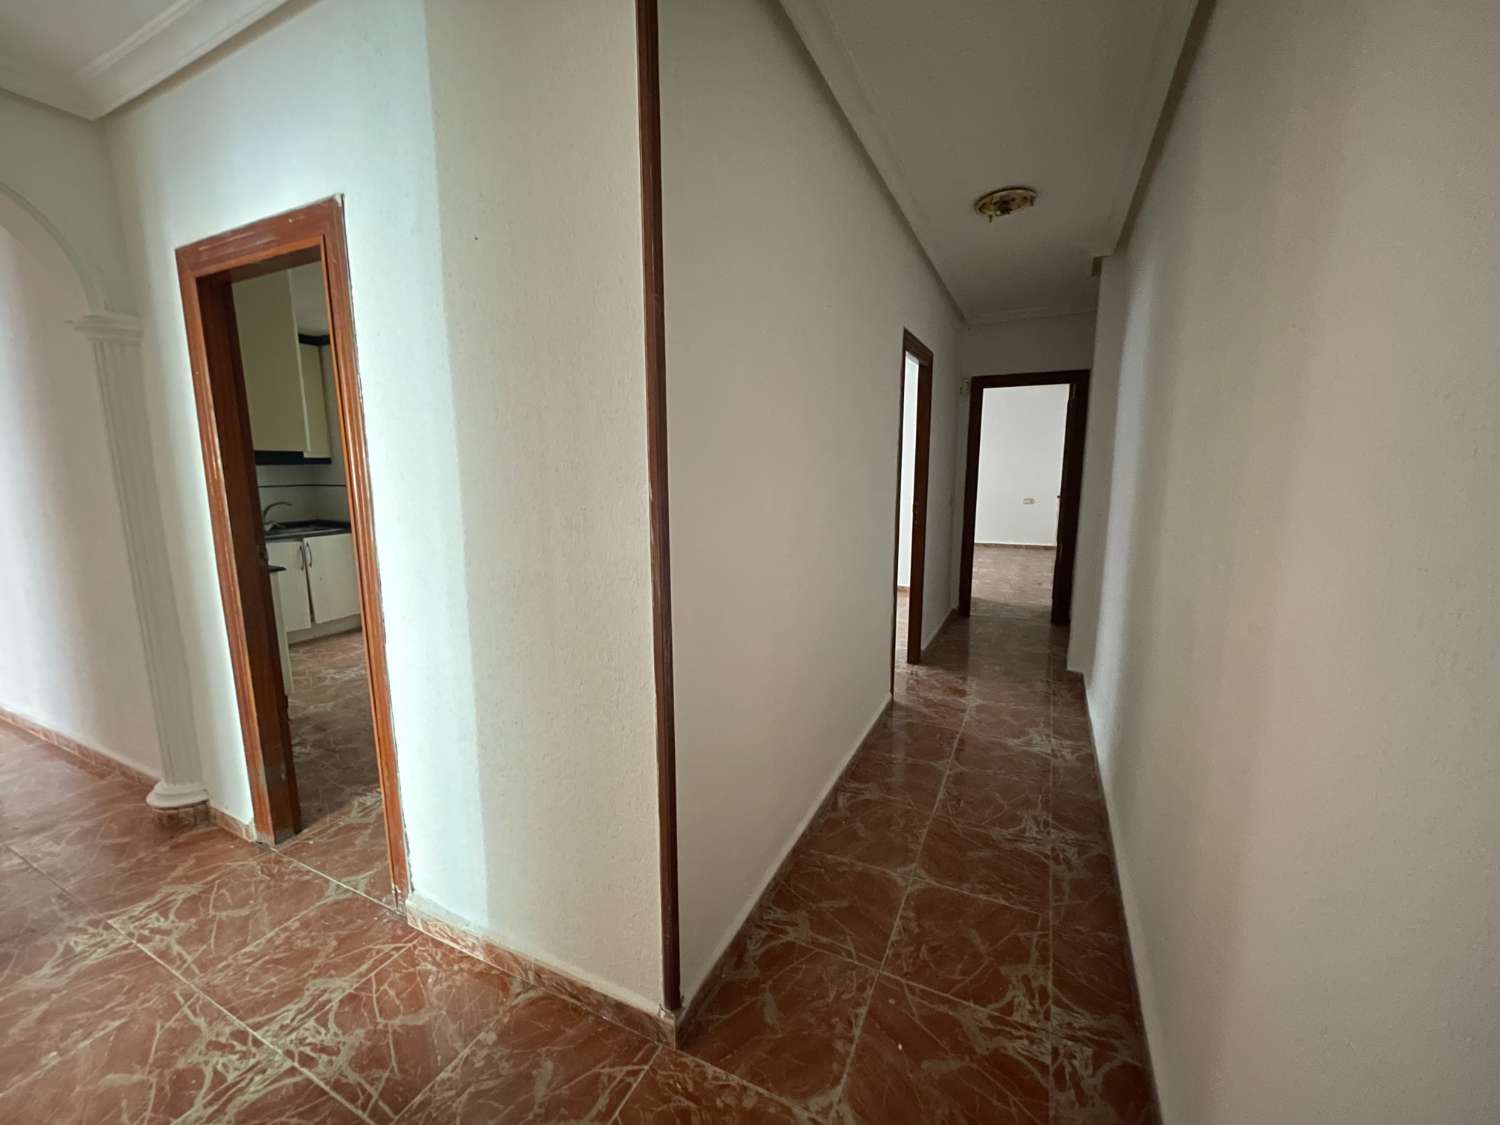 MAKE YOUR OFFER!! 3 BEDROOM APARTMENT SOUTH ORIENTATION IN THE CENTER OF ORIHUELA!!